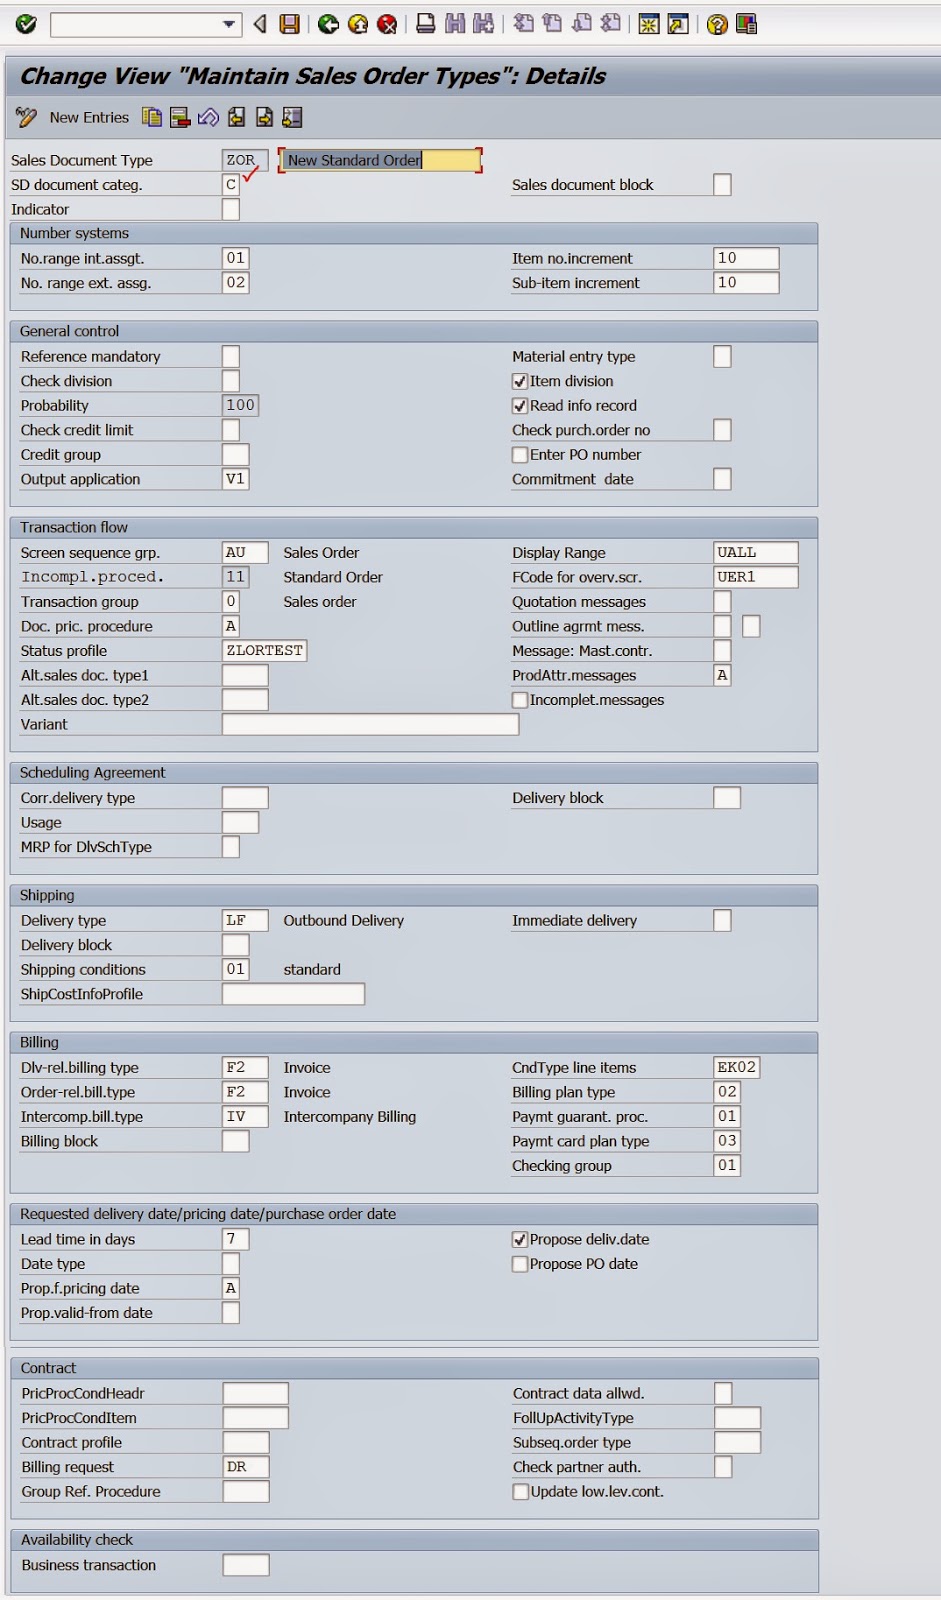 sales document type assignment to sales area table